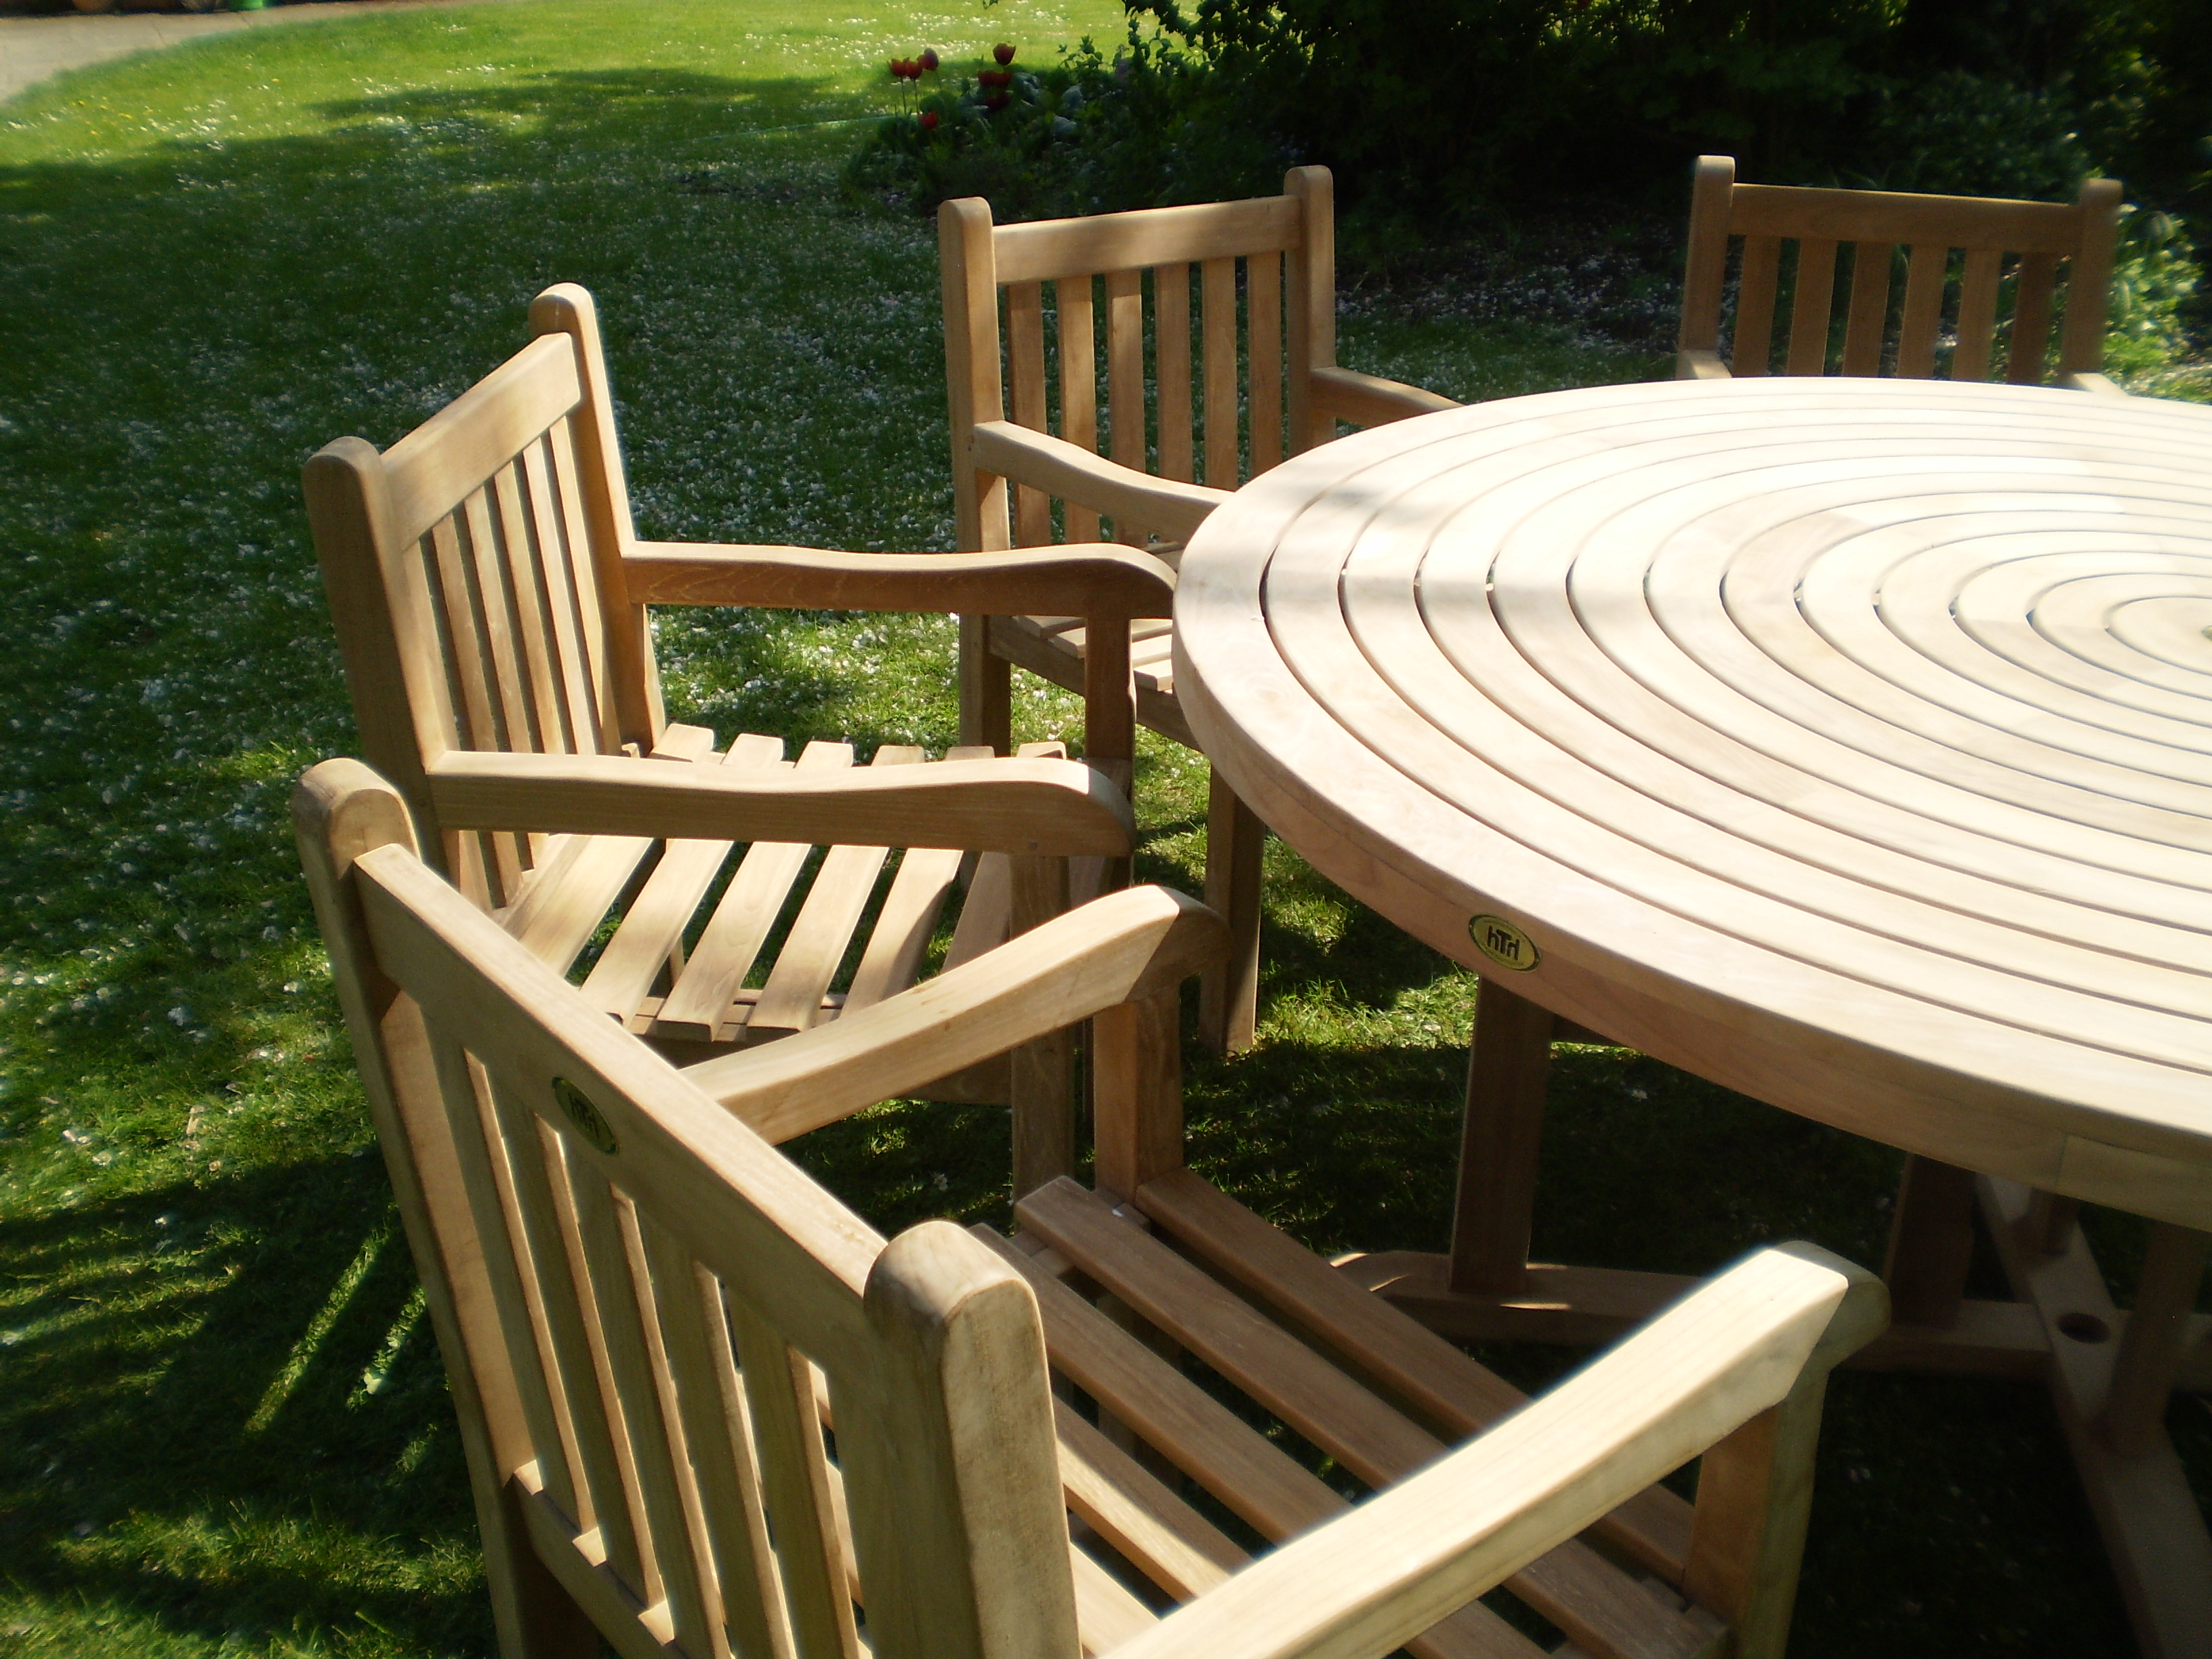 Create A Serene Oasis With Teak Garden Furniture: Our Favorite Pieces